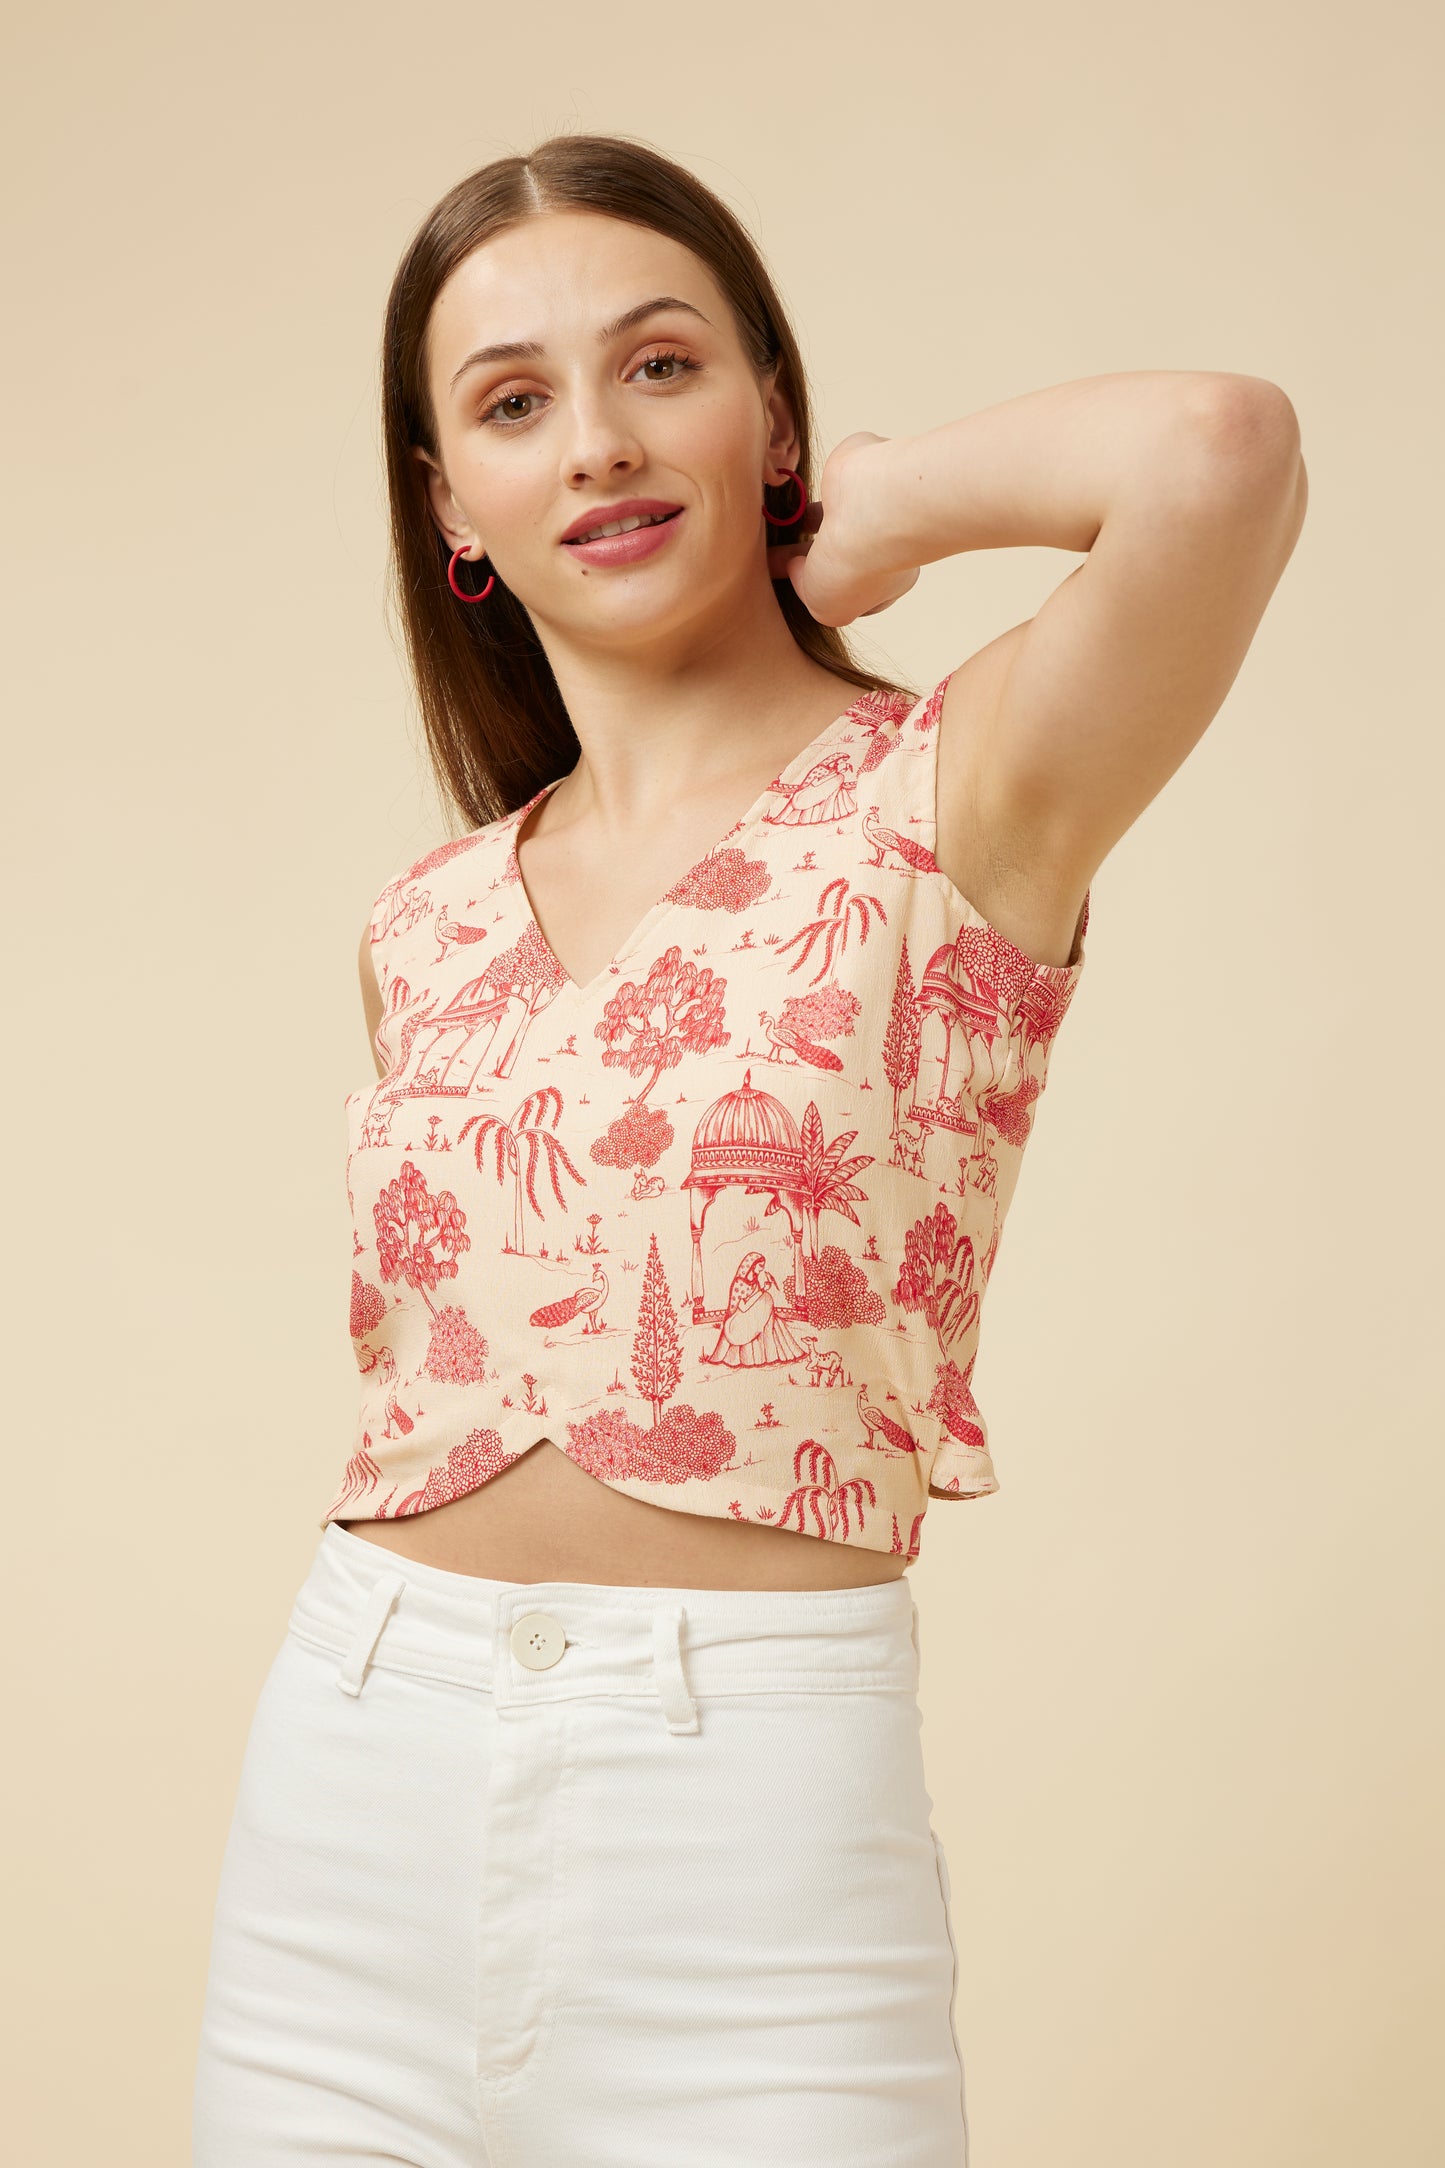 Model poses with hand behind head, showcasing the 'Jaipur Rani' crop top with V-neck front in a Jaipur-inspired print